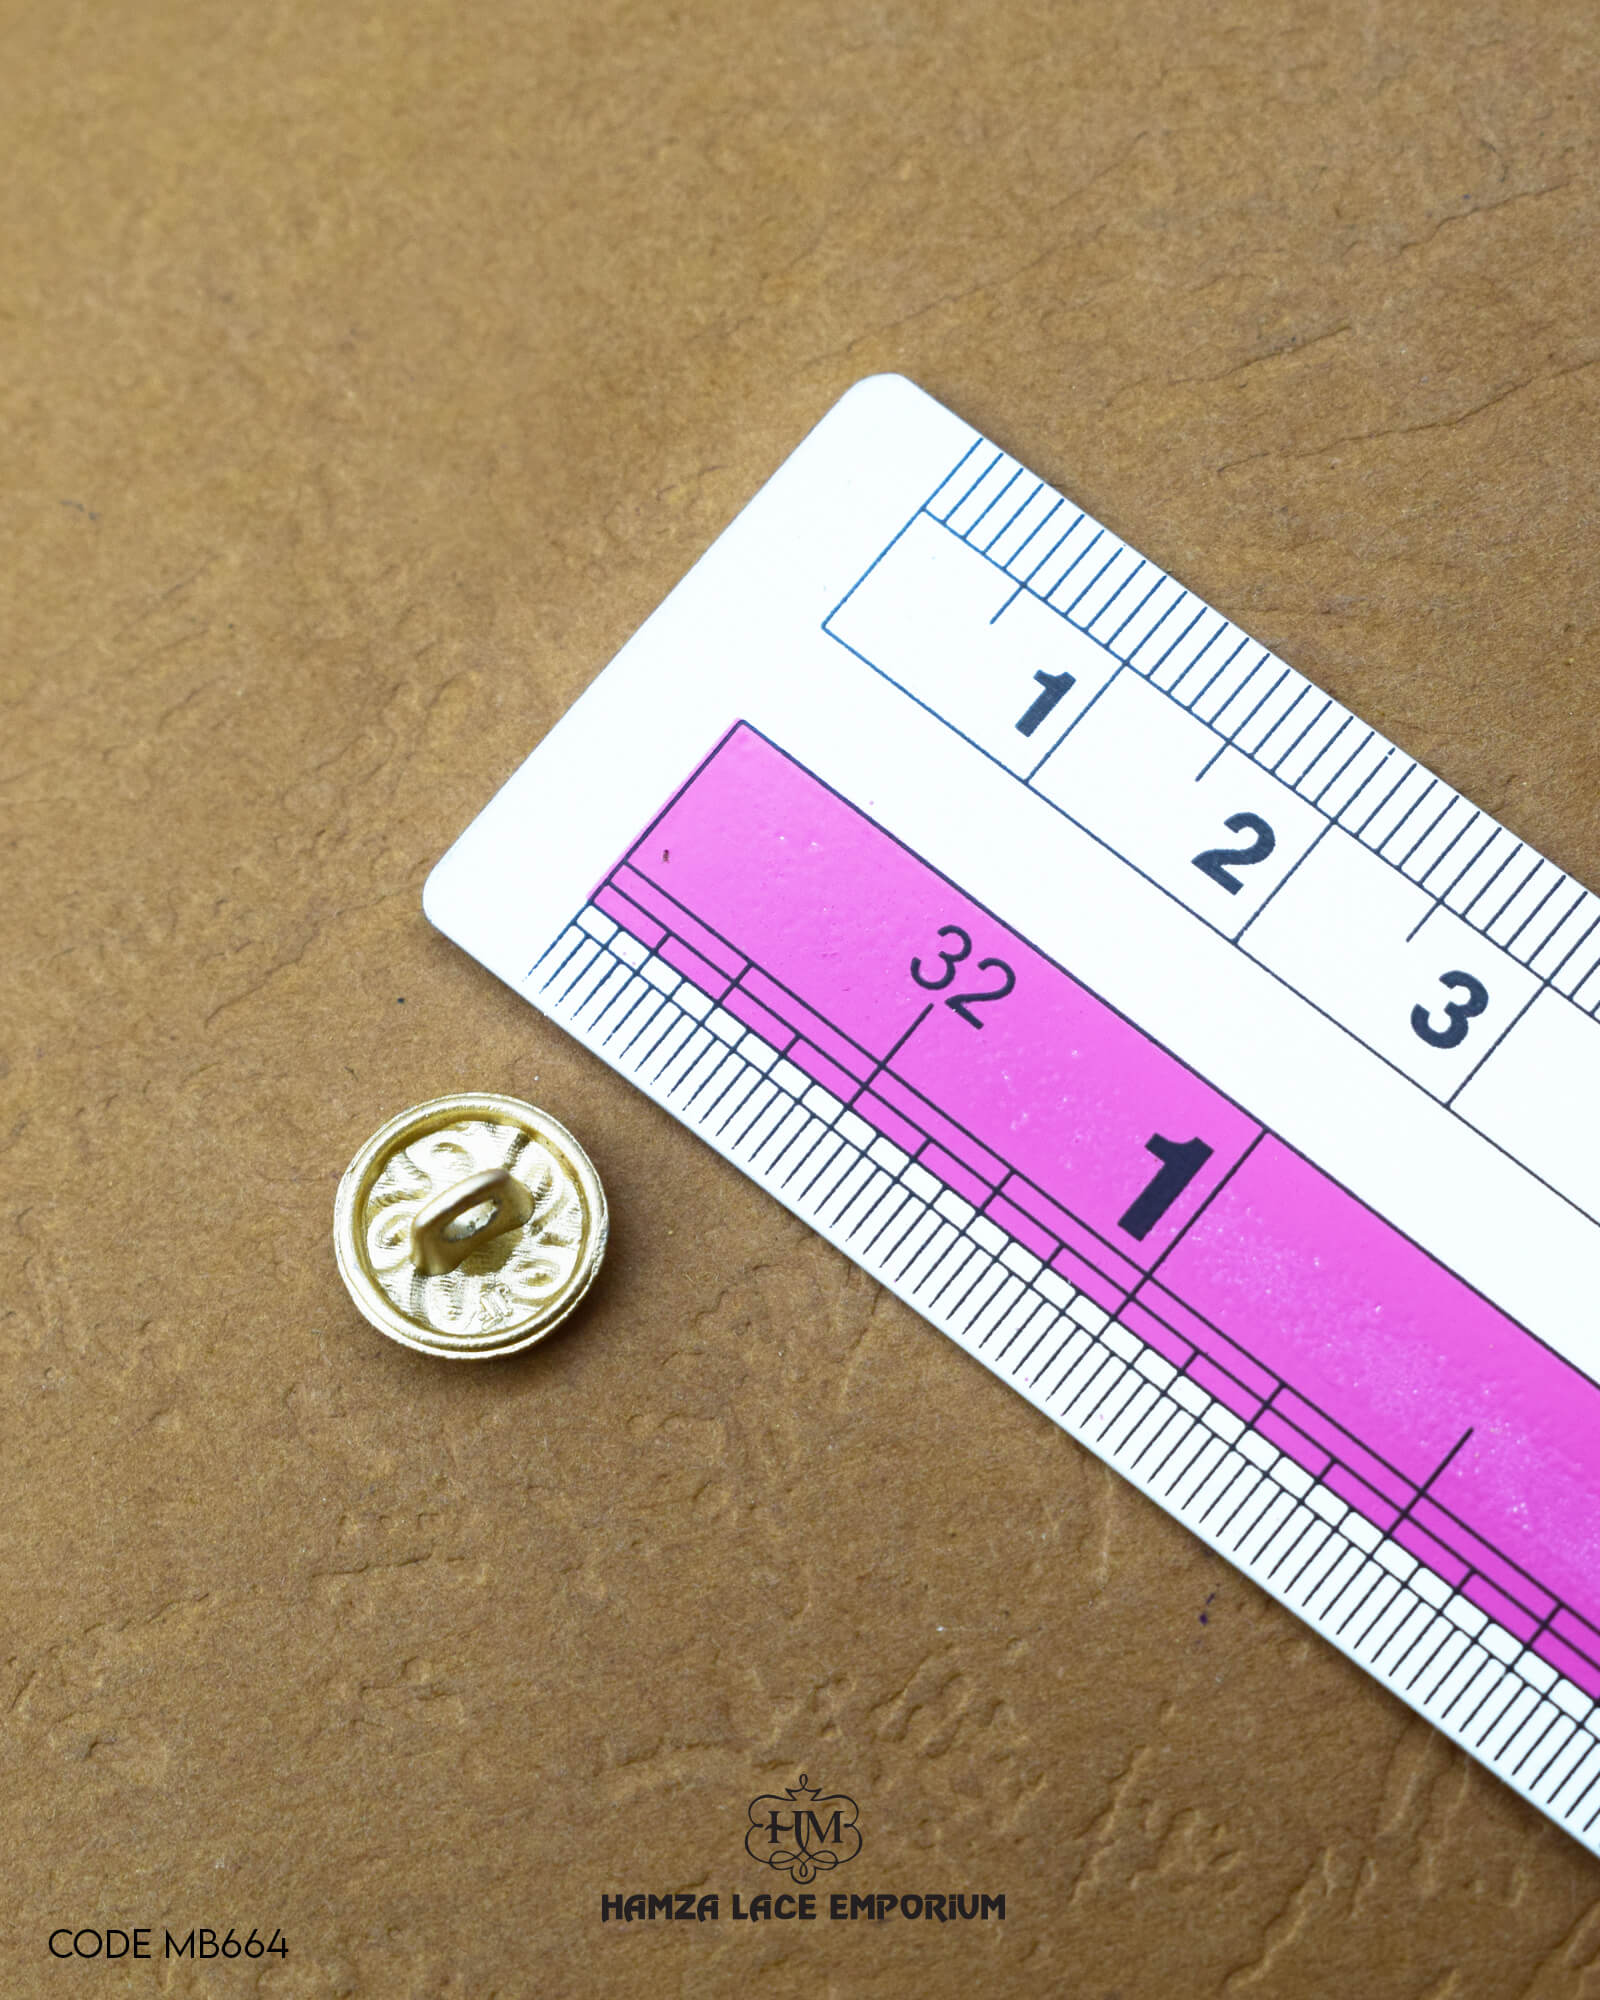 The dimensions of the 'Flower Design Button MB664' are determined using a ruler.